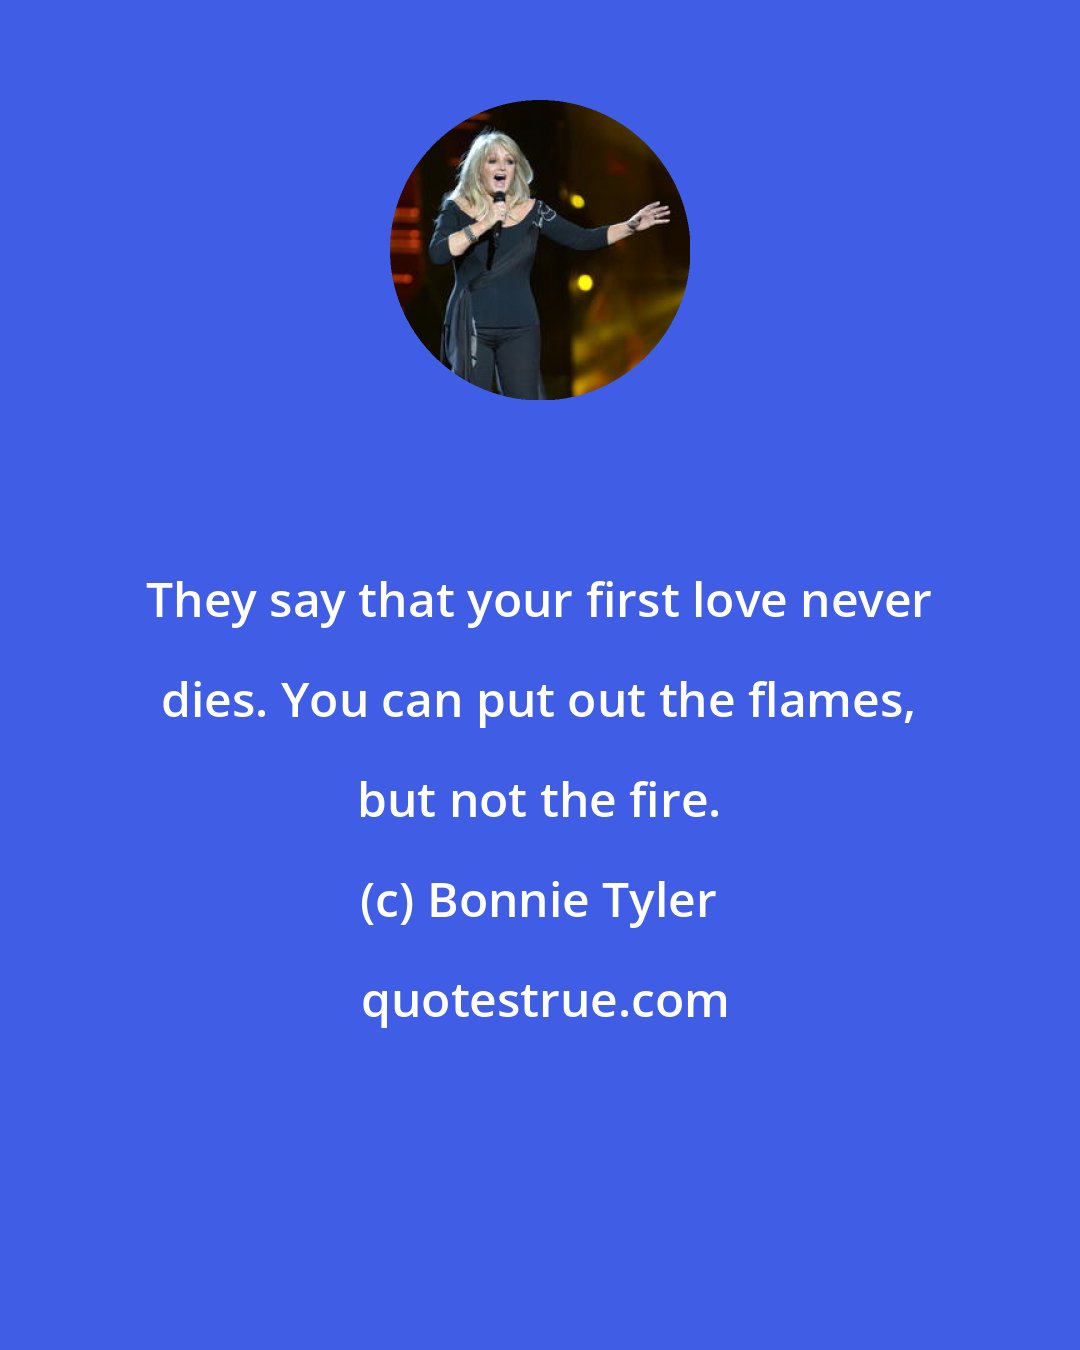 Bonnie Tyler: They say that your first love never dies. You can put out the flames, but not the fire.